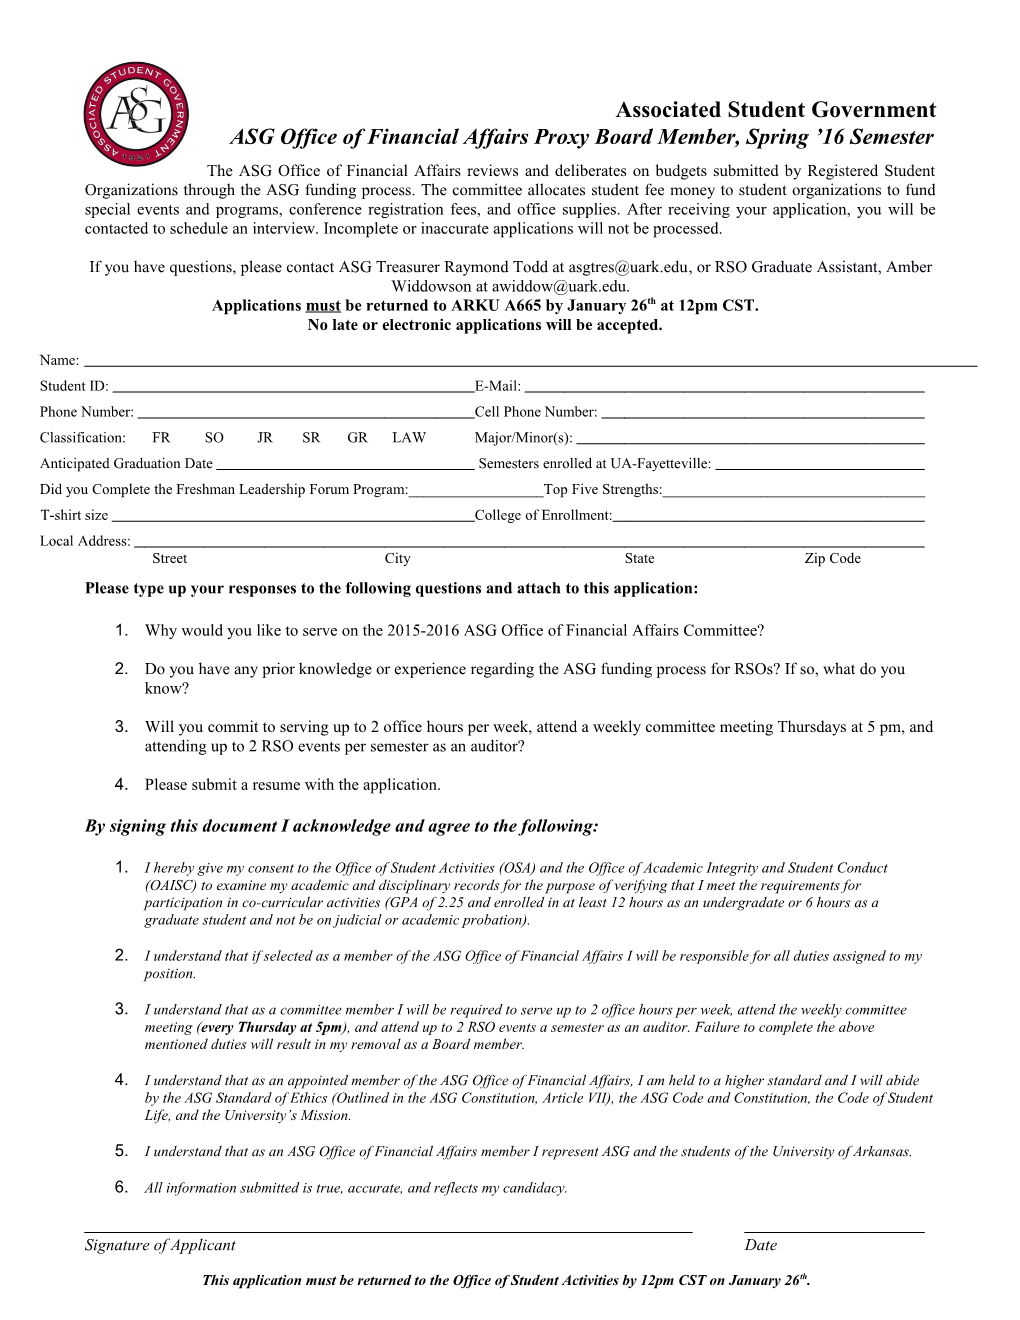 Associated Student Government University Committee Application